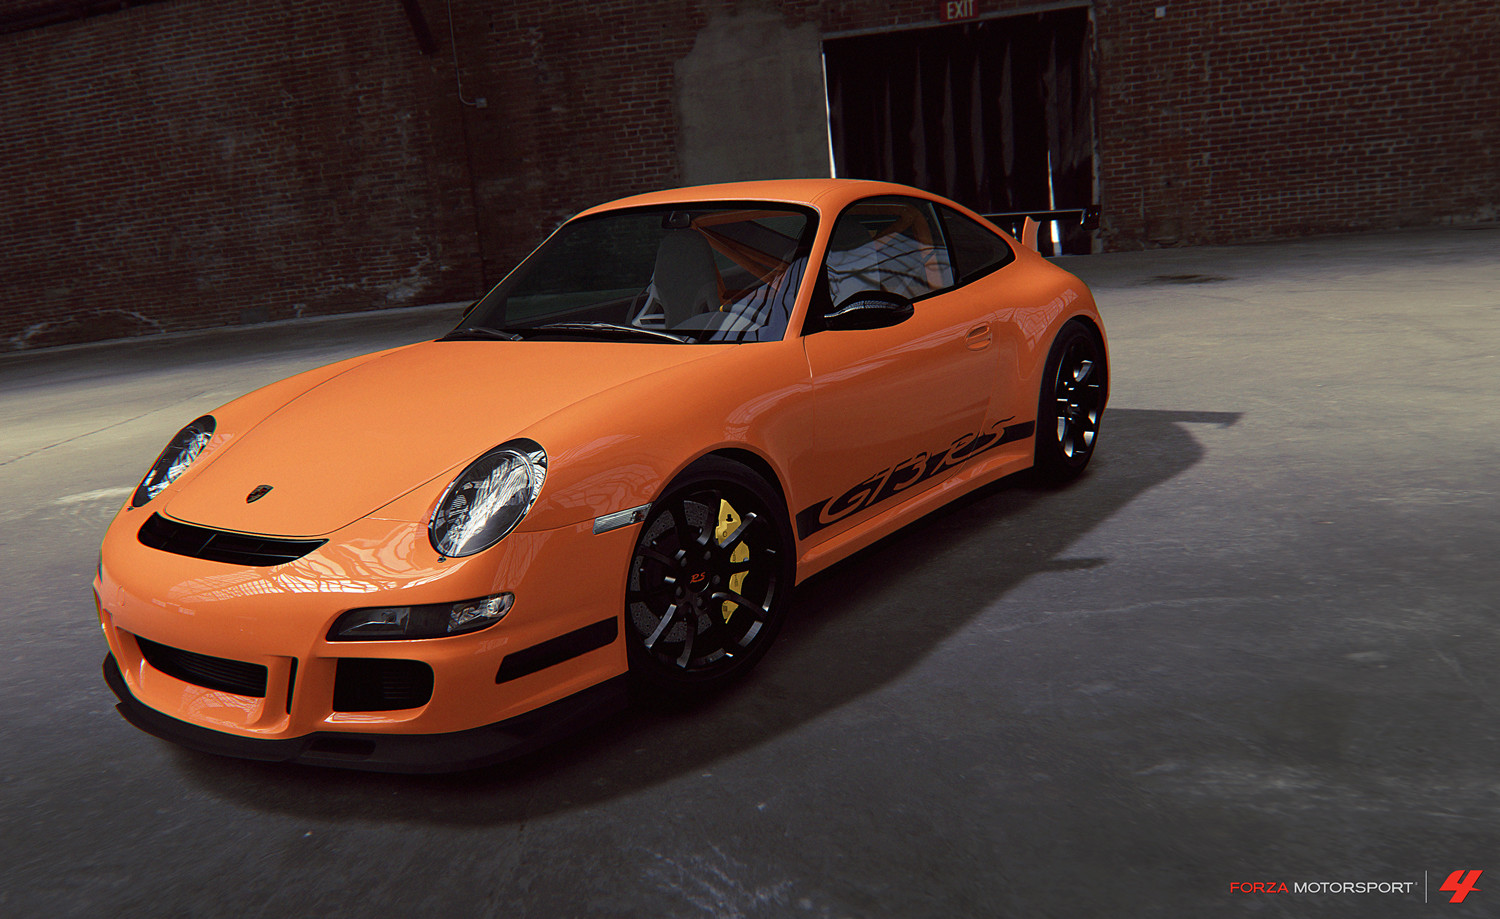 Took the 911 GT3 RS model from Forza 2 and updated it for Forza 4. Remodeled front and back end.